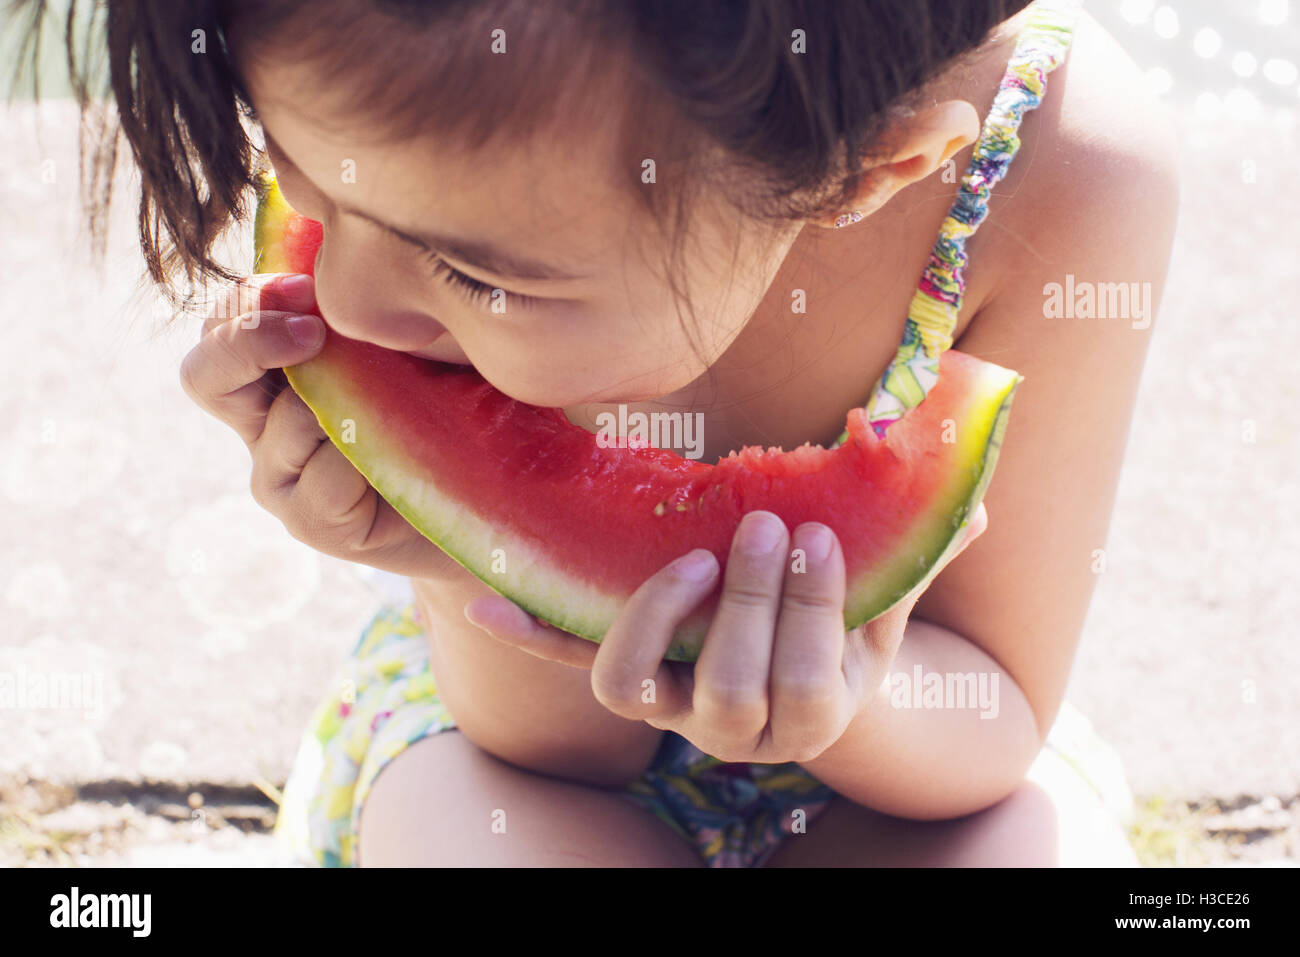 Girl eating watermelon, close-up Stock Photo